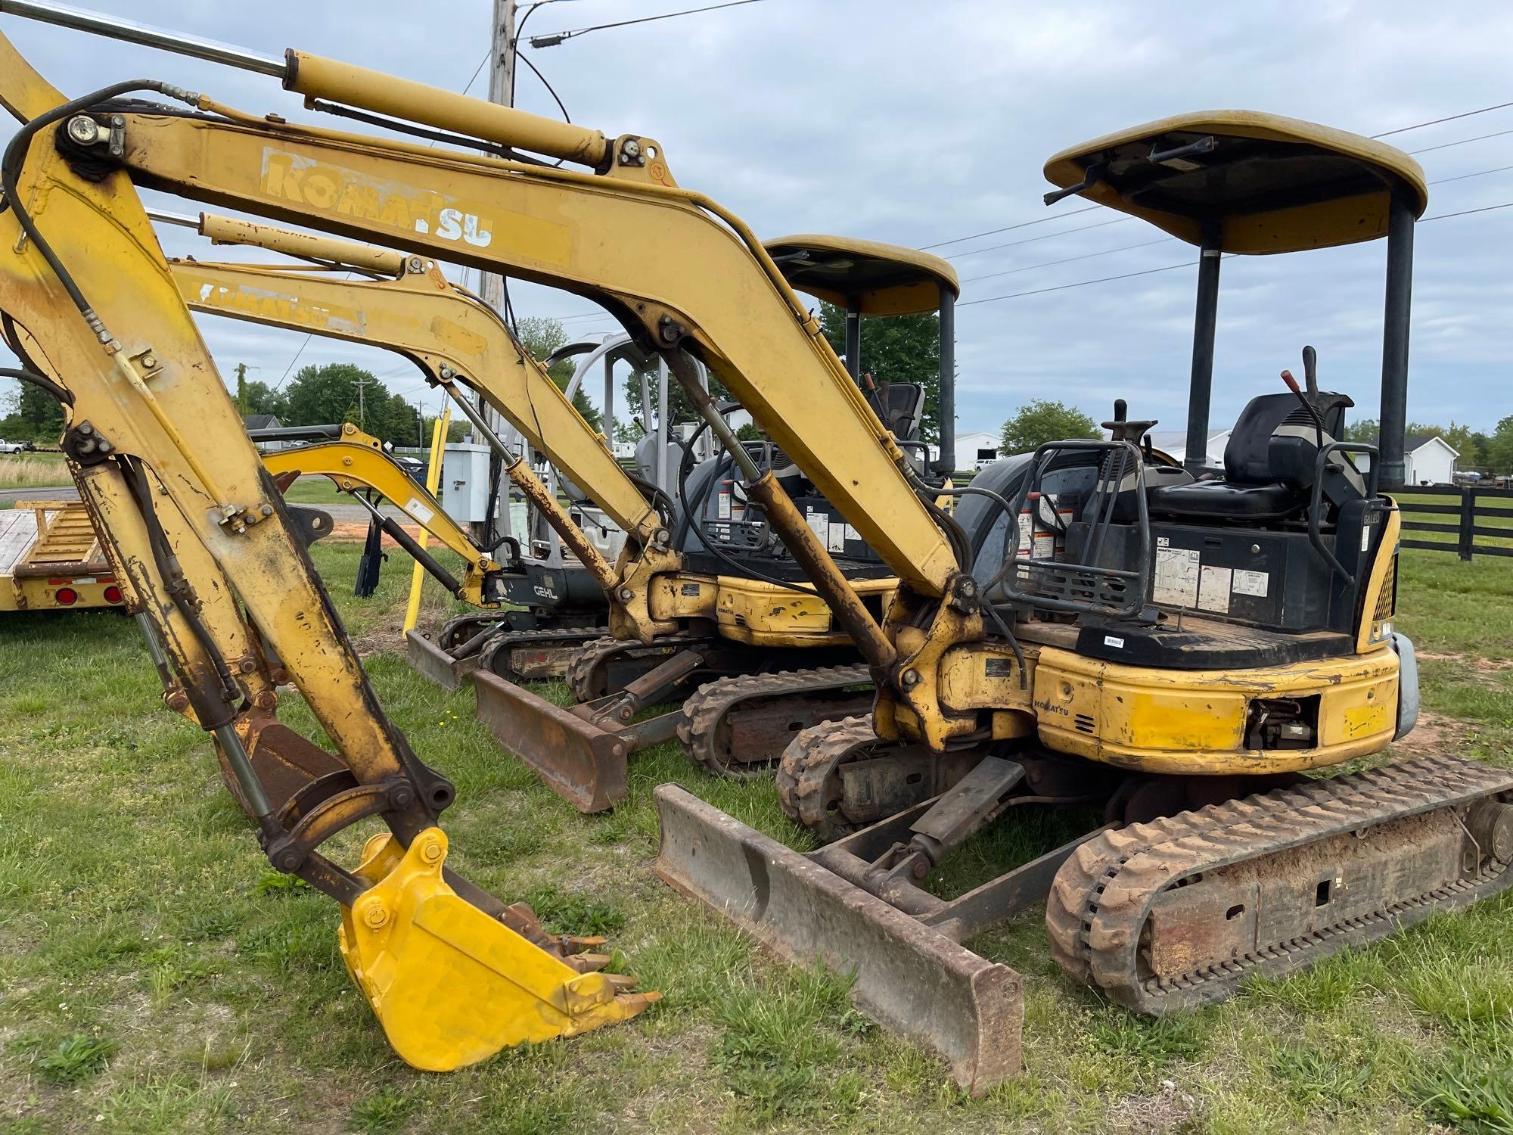 Image for Komatsu PCMR Mini Excavator with 24” bucket, 1532 hours showing, tracks less than 50%, per seller- serviced every 200 hours